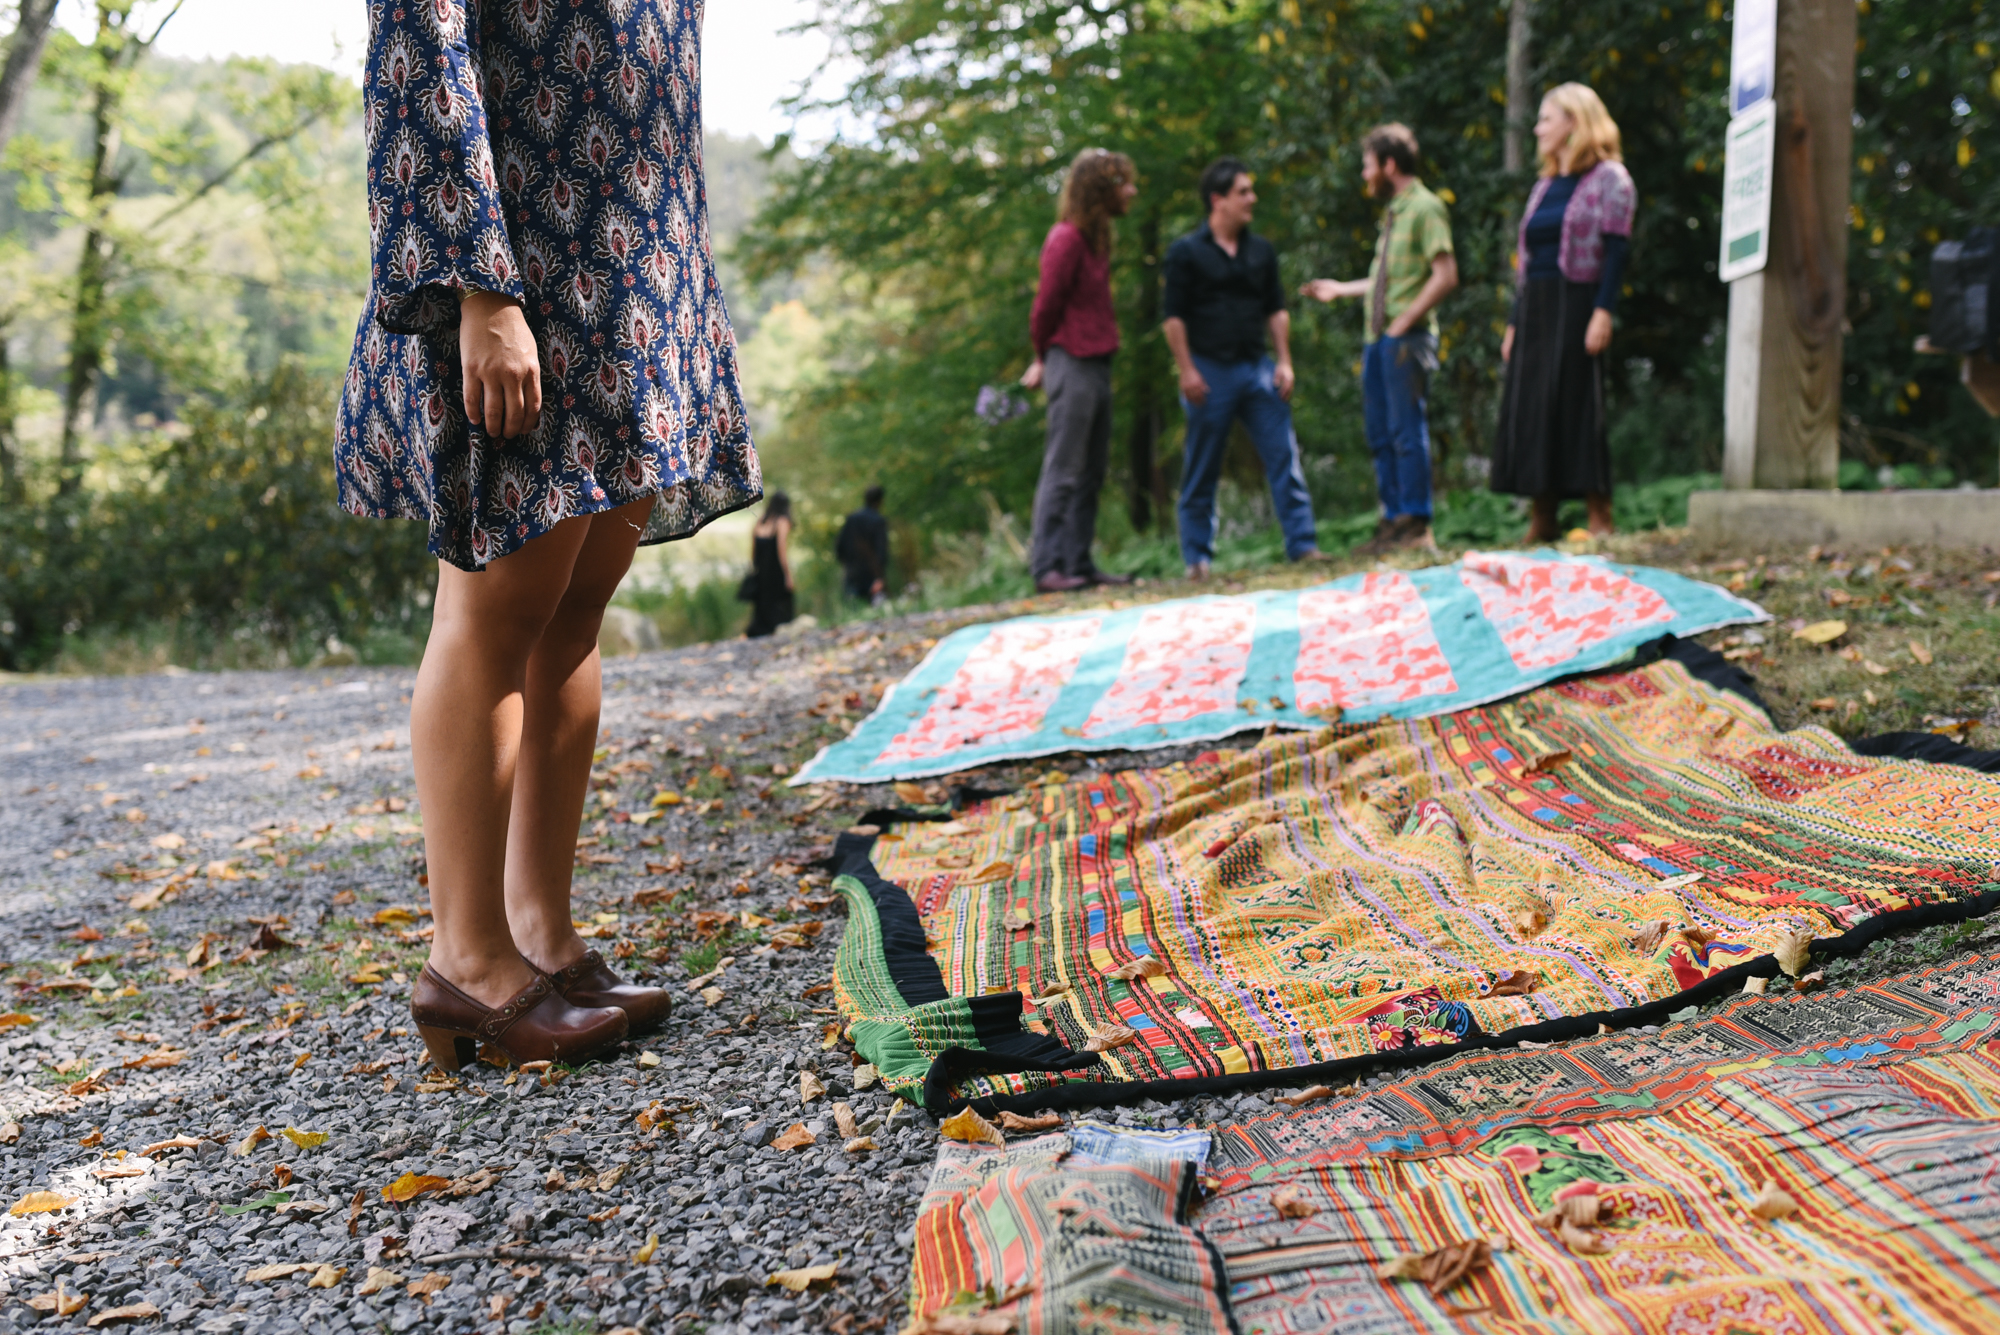  Mountain Wedding, Outdoors, Rustic, West Virginia, Maryland Wedding Photographer, DIY, Casual, Laying out colorful blankets before ceremony 